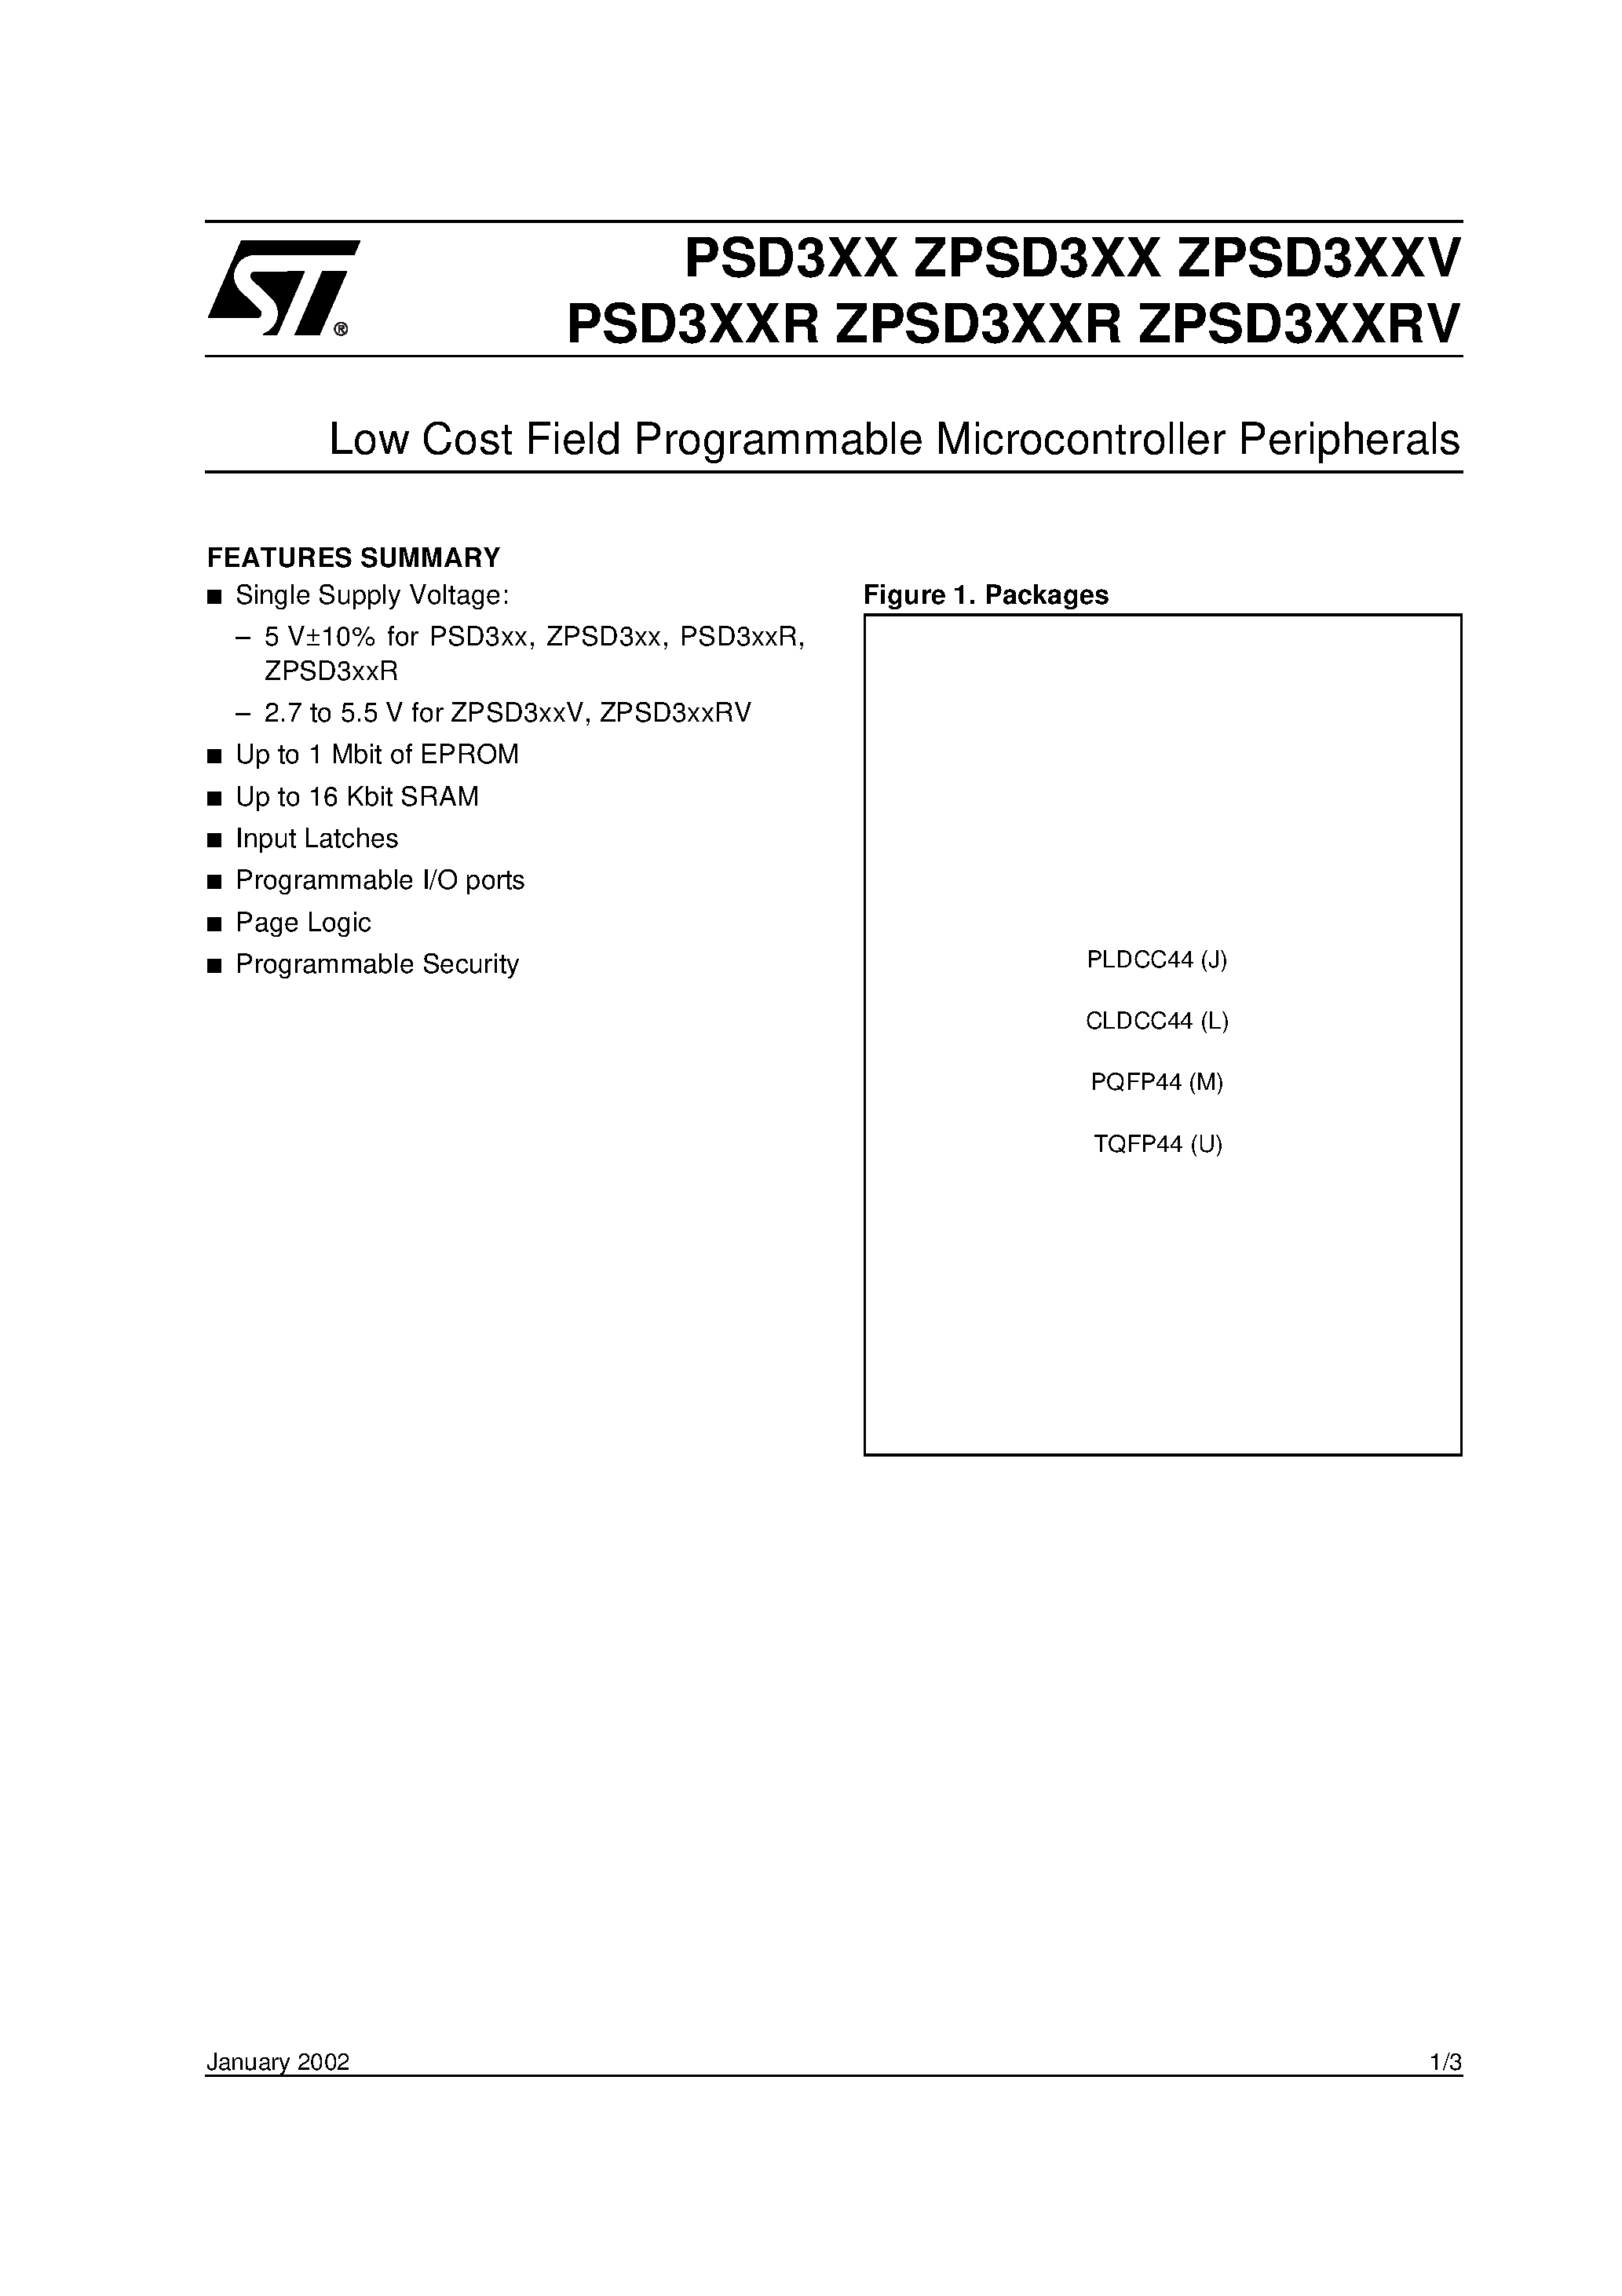 Datasheet PSD311-B-15M - Low Cost Field Programmable Microcontroller Peripherals page 1